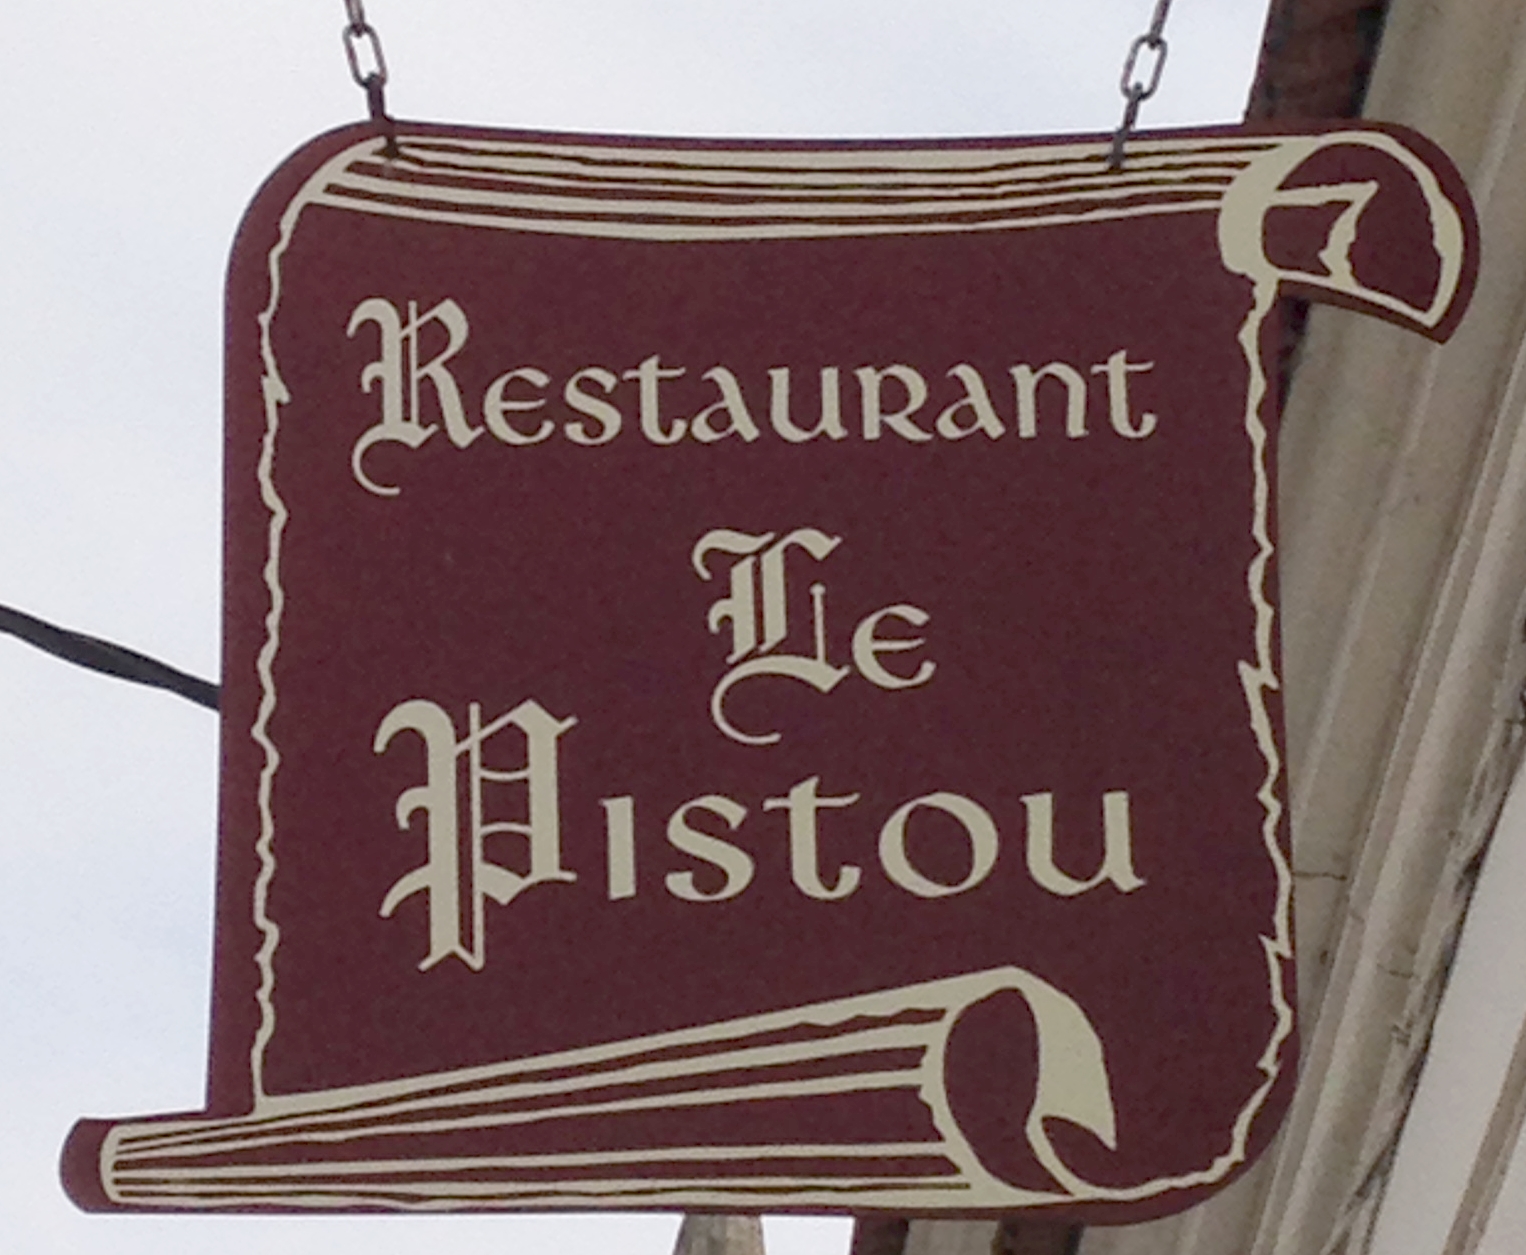 You are currently viewing Zoom Restaurant Le Pistou – Thierry LEFAYE